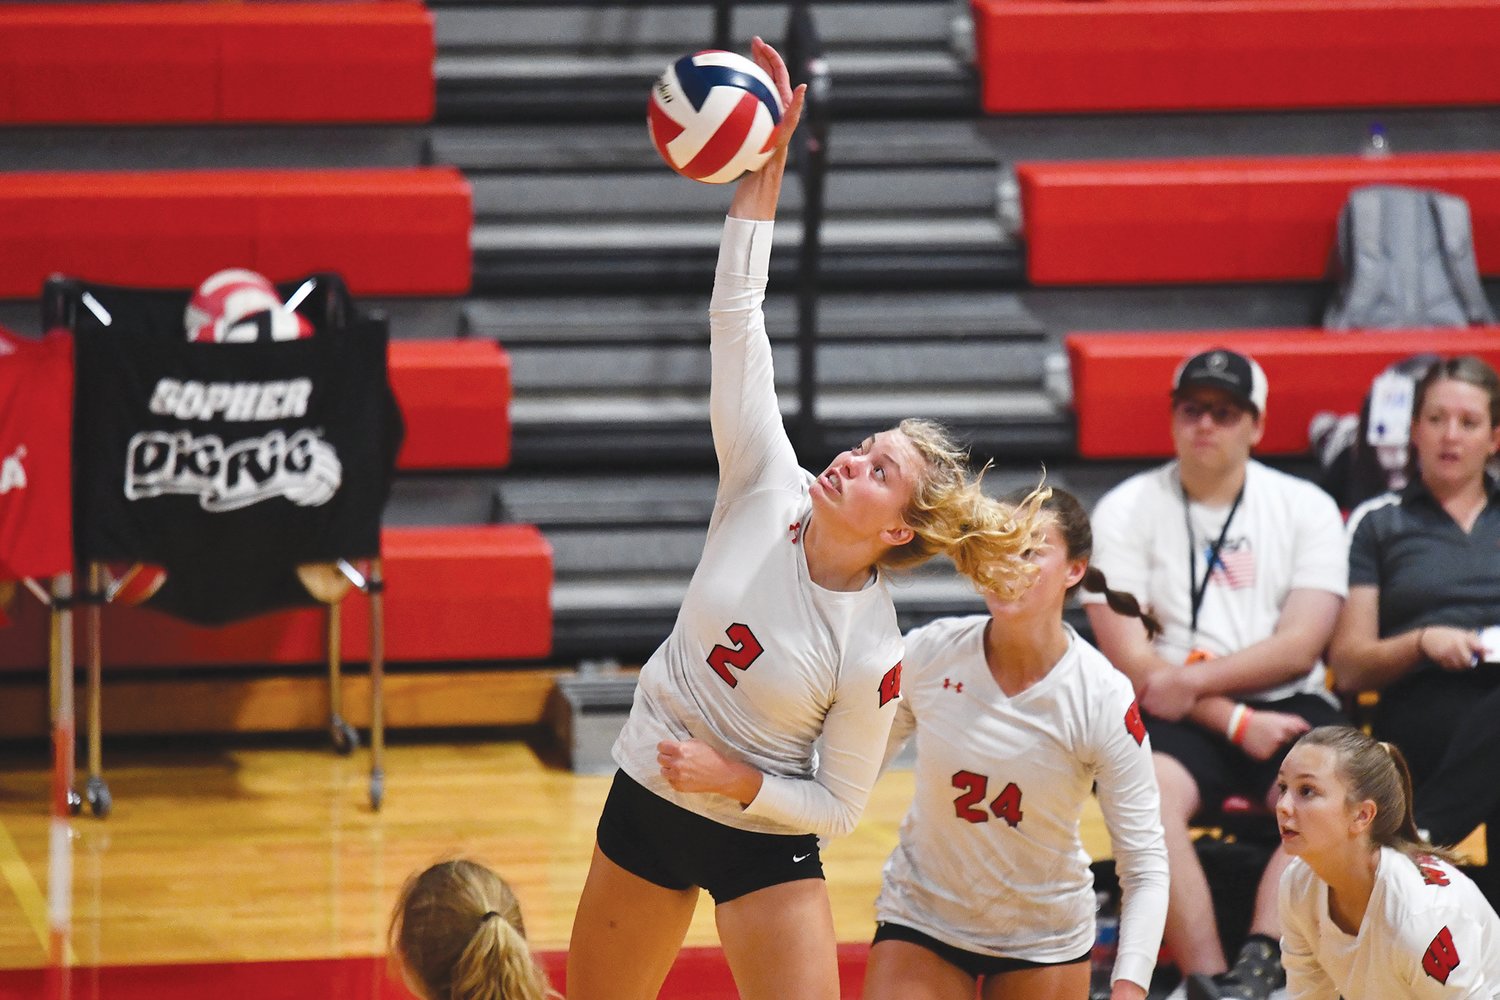 STATE LEADER — Warrenton senior Josey Schipper led the state in kills with 451 en route to being the program’s second player to earn all-state honors.